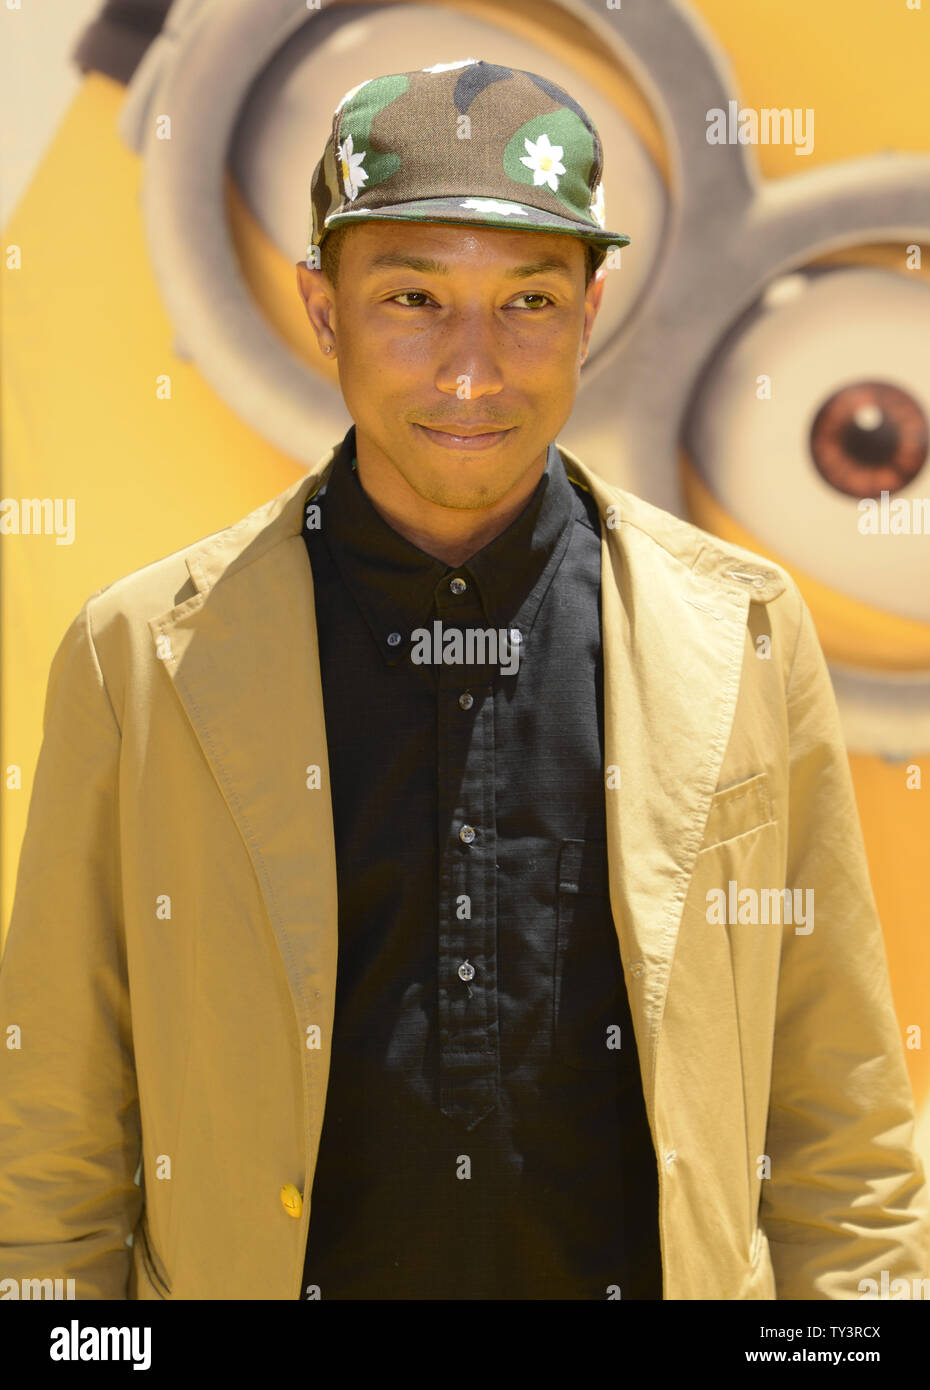 Pharrell williams grammys hi-res stock photography and images - Alamy